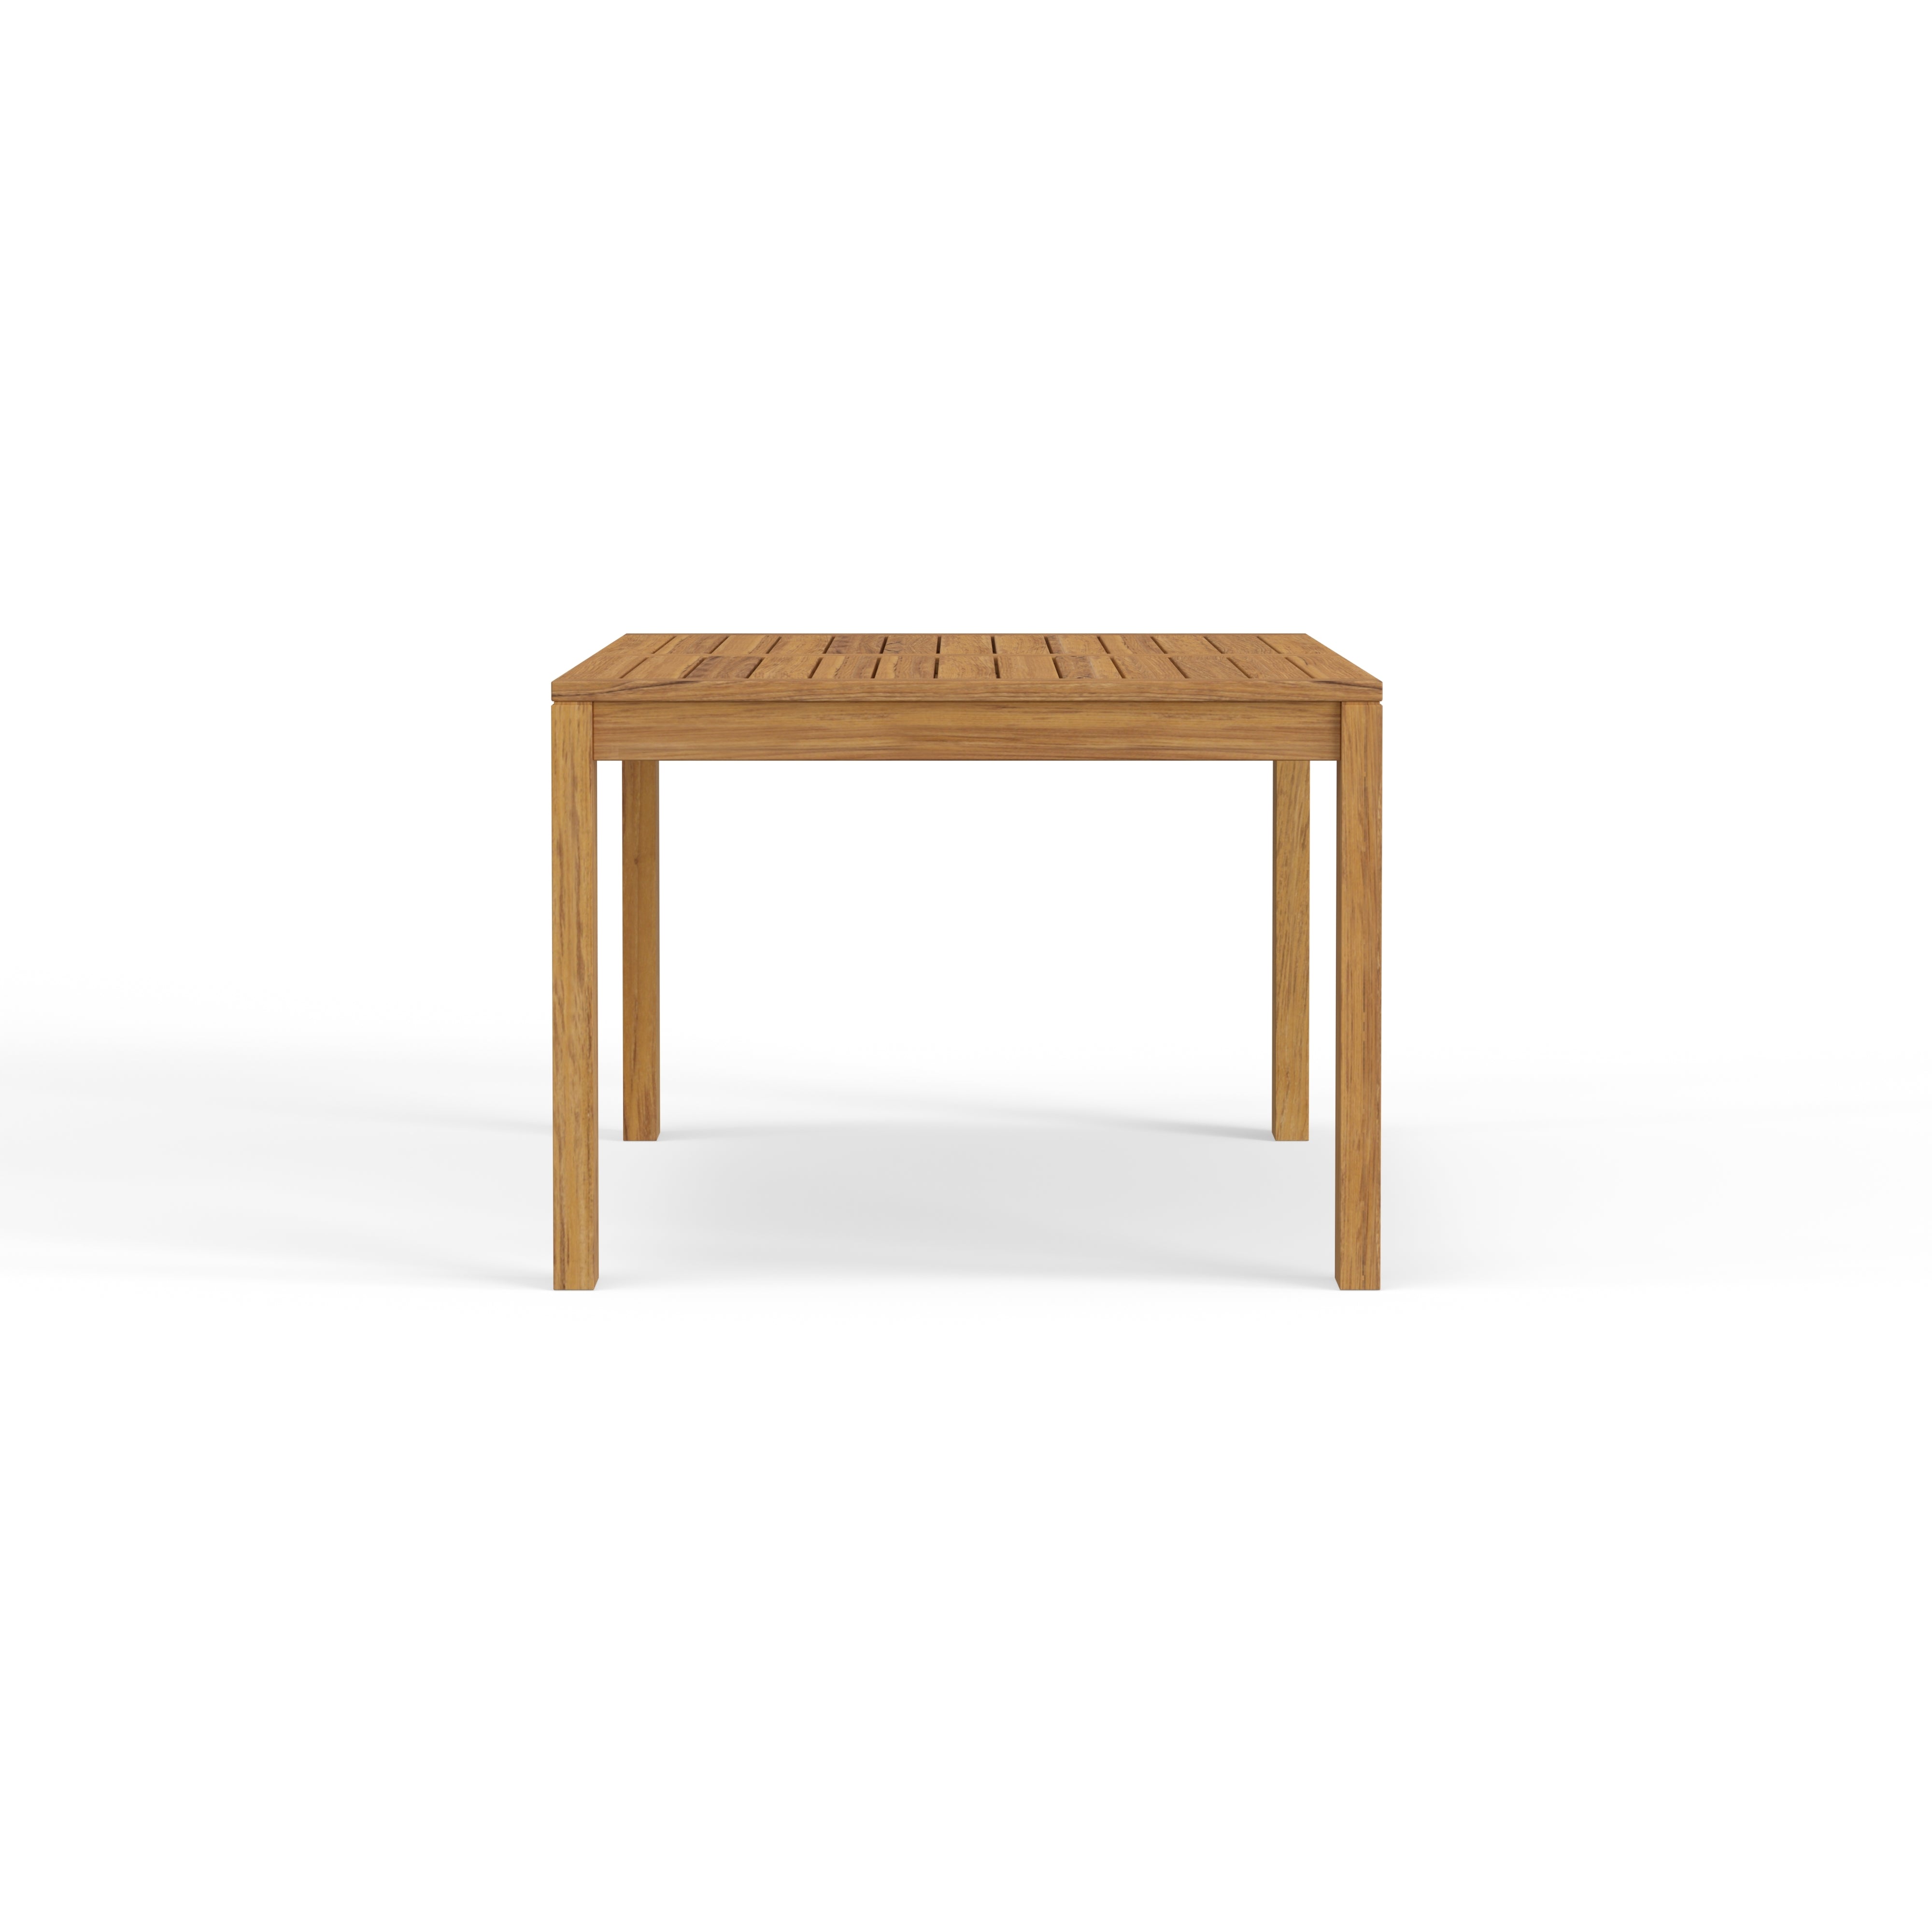 Teak Outdoor Dining Table For Eight